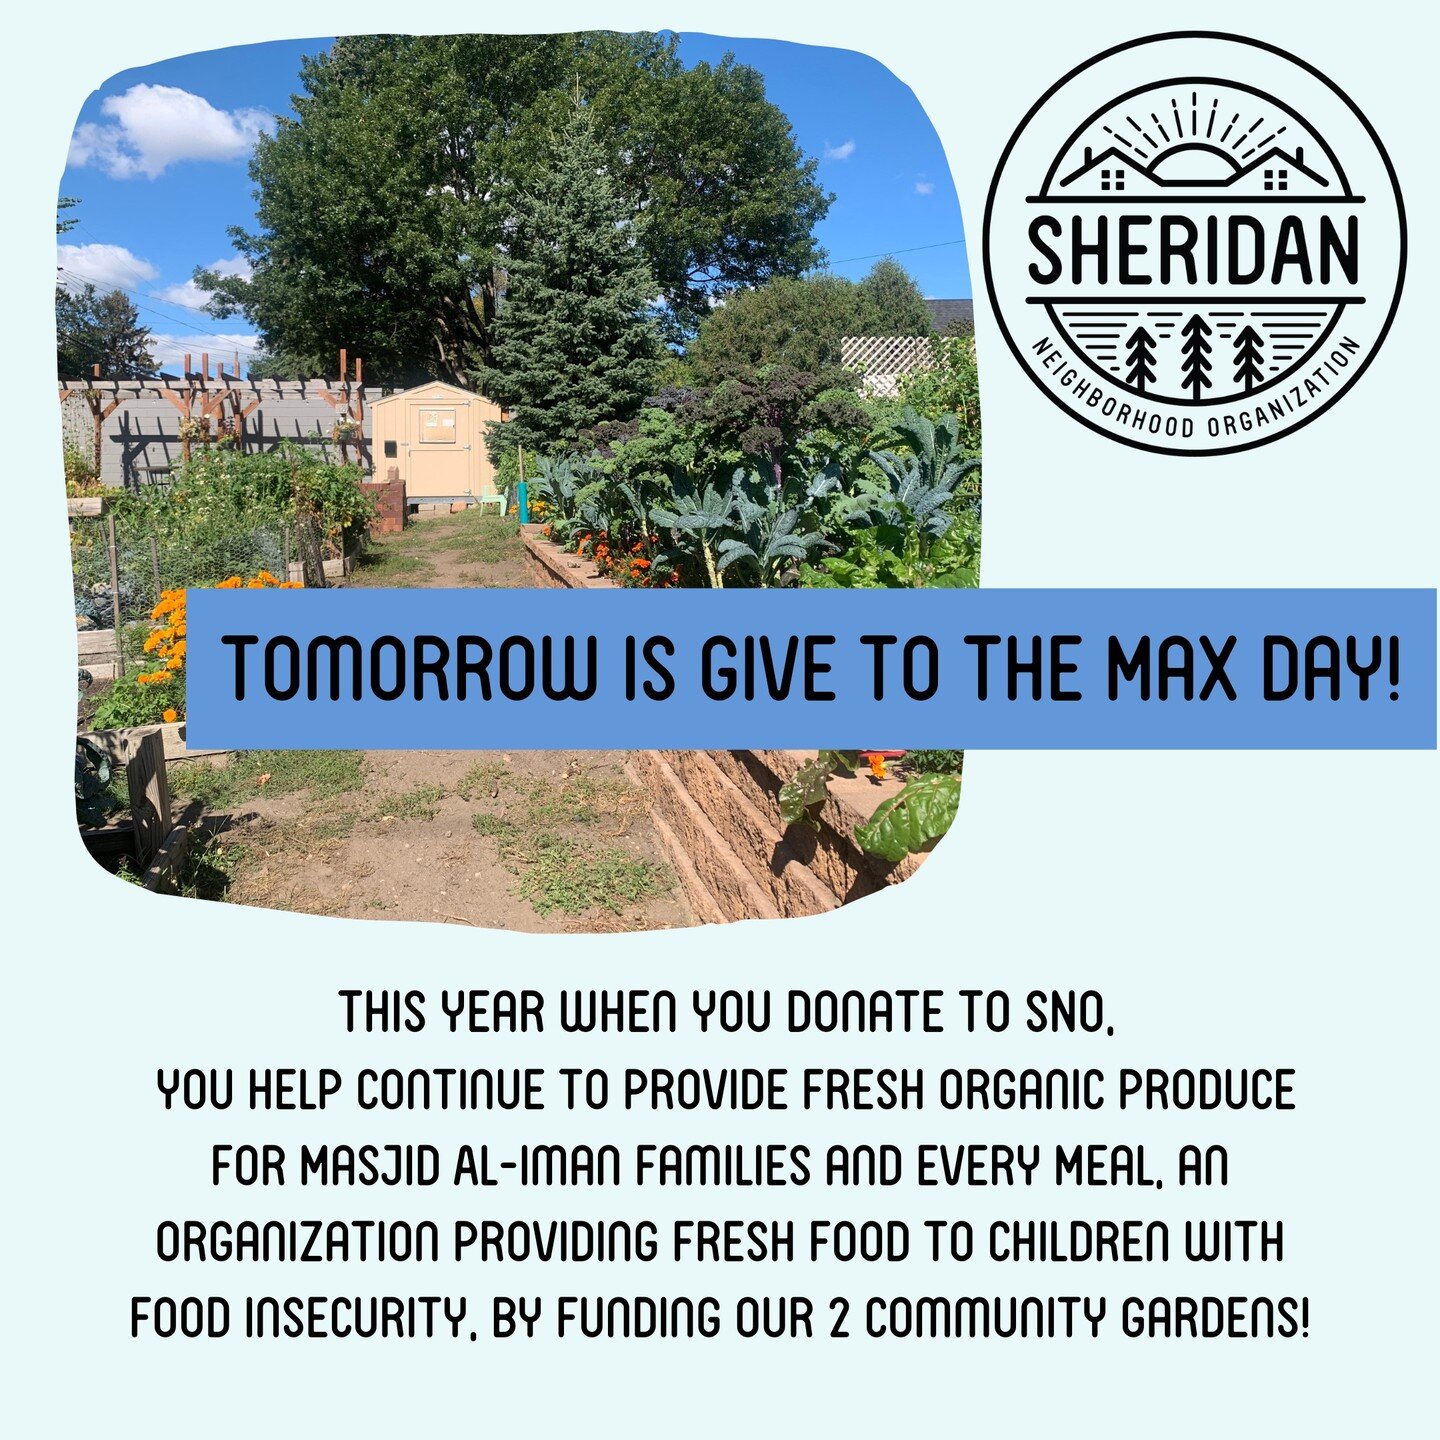 Give to the Max Day is Tomorrow!

This year when you donate to SNO,
 you help continue to provide fresh organic produce for Masjid Al-Iman families and Every Meal, an organization providing fresh food to children with food insecurity, by funding our 